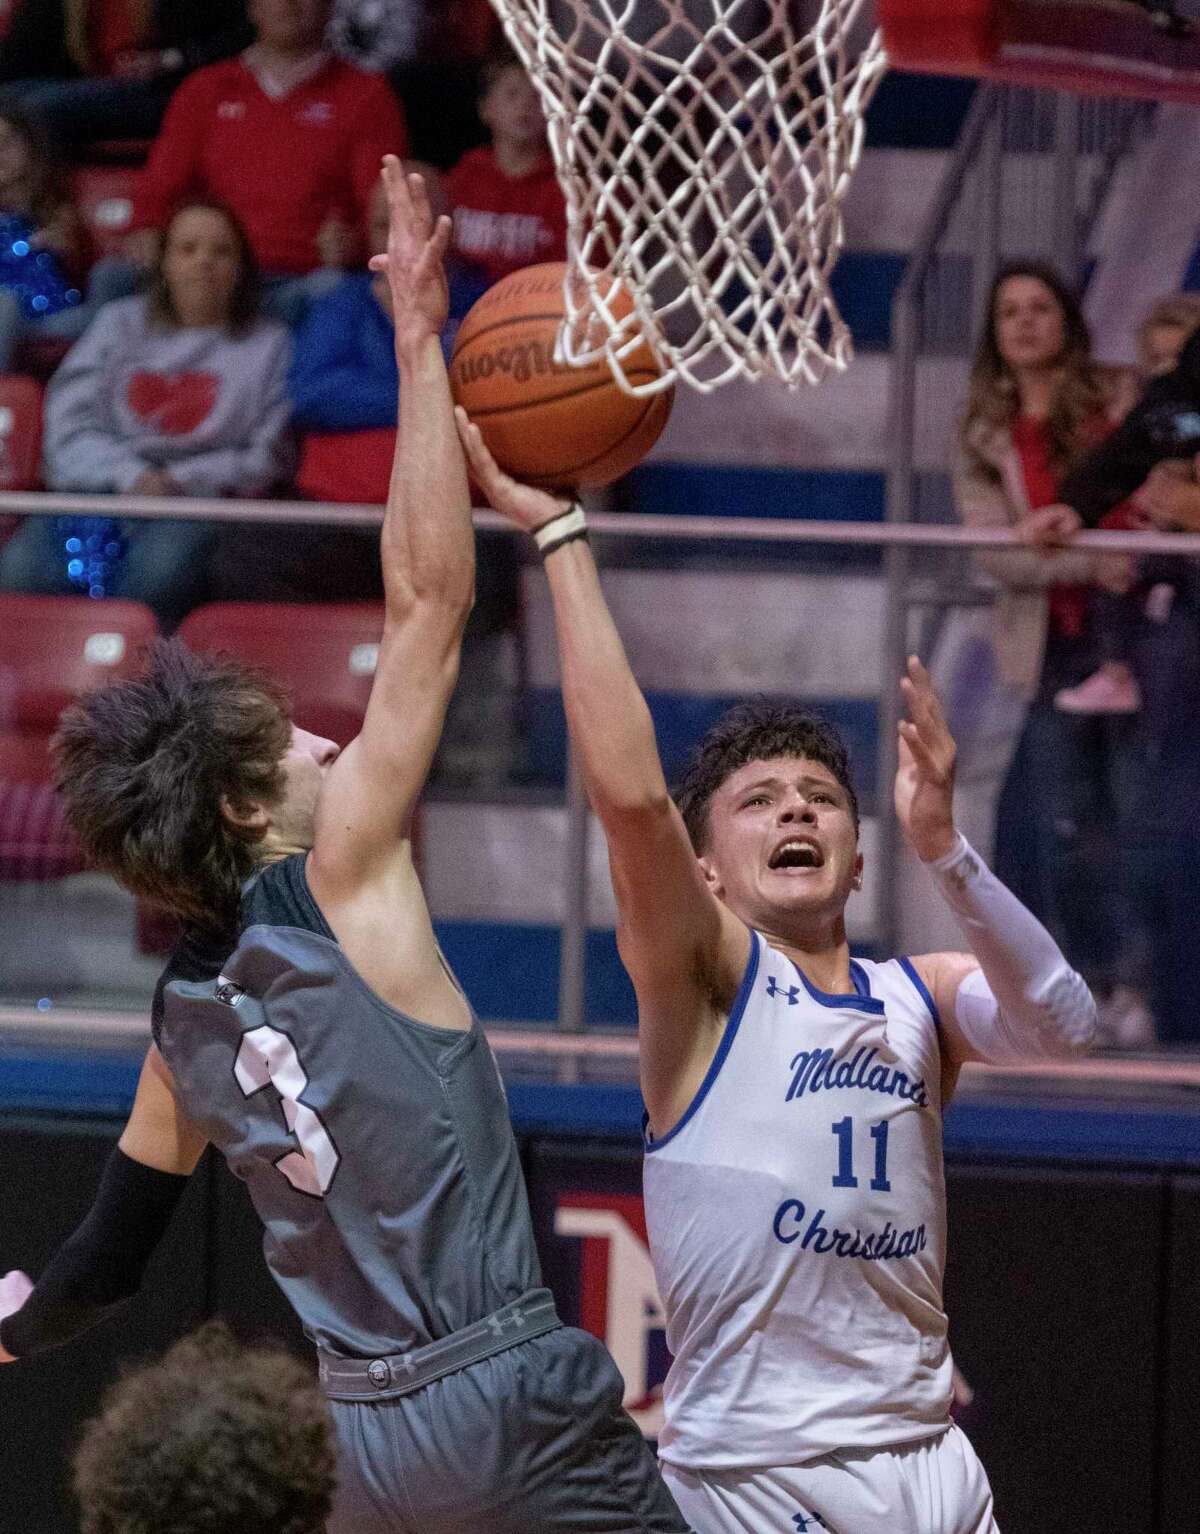 Midland Christian's Deshaun Ortiz goes up for a shot as Dallas Bishop's Grayson Bell defends 02/22/2022 during the TAPPS 6A area playoff at the McGraw Event Center. Tim Fischer/Reporter-Telegram